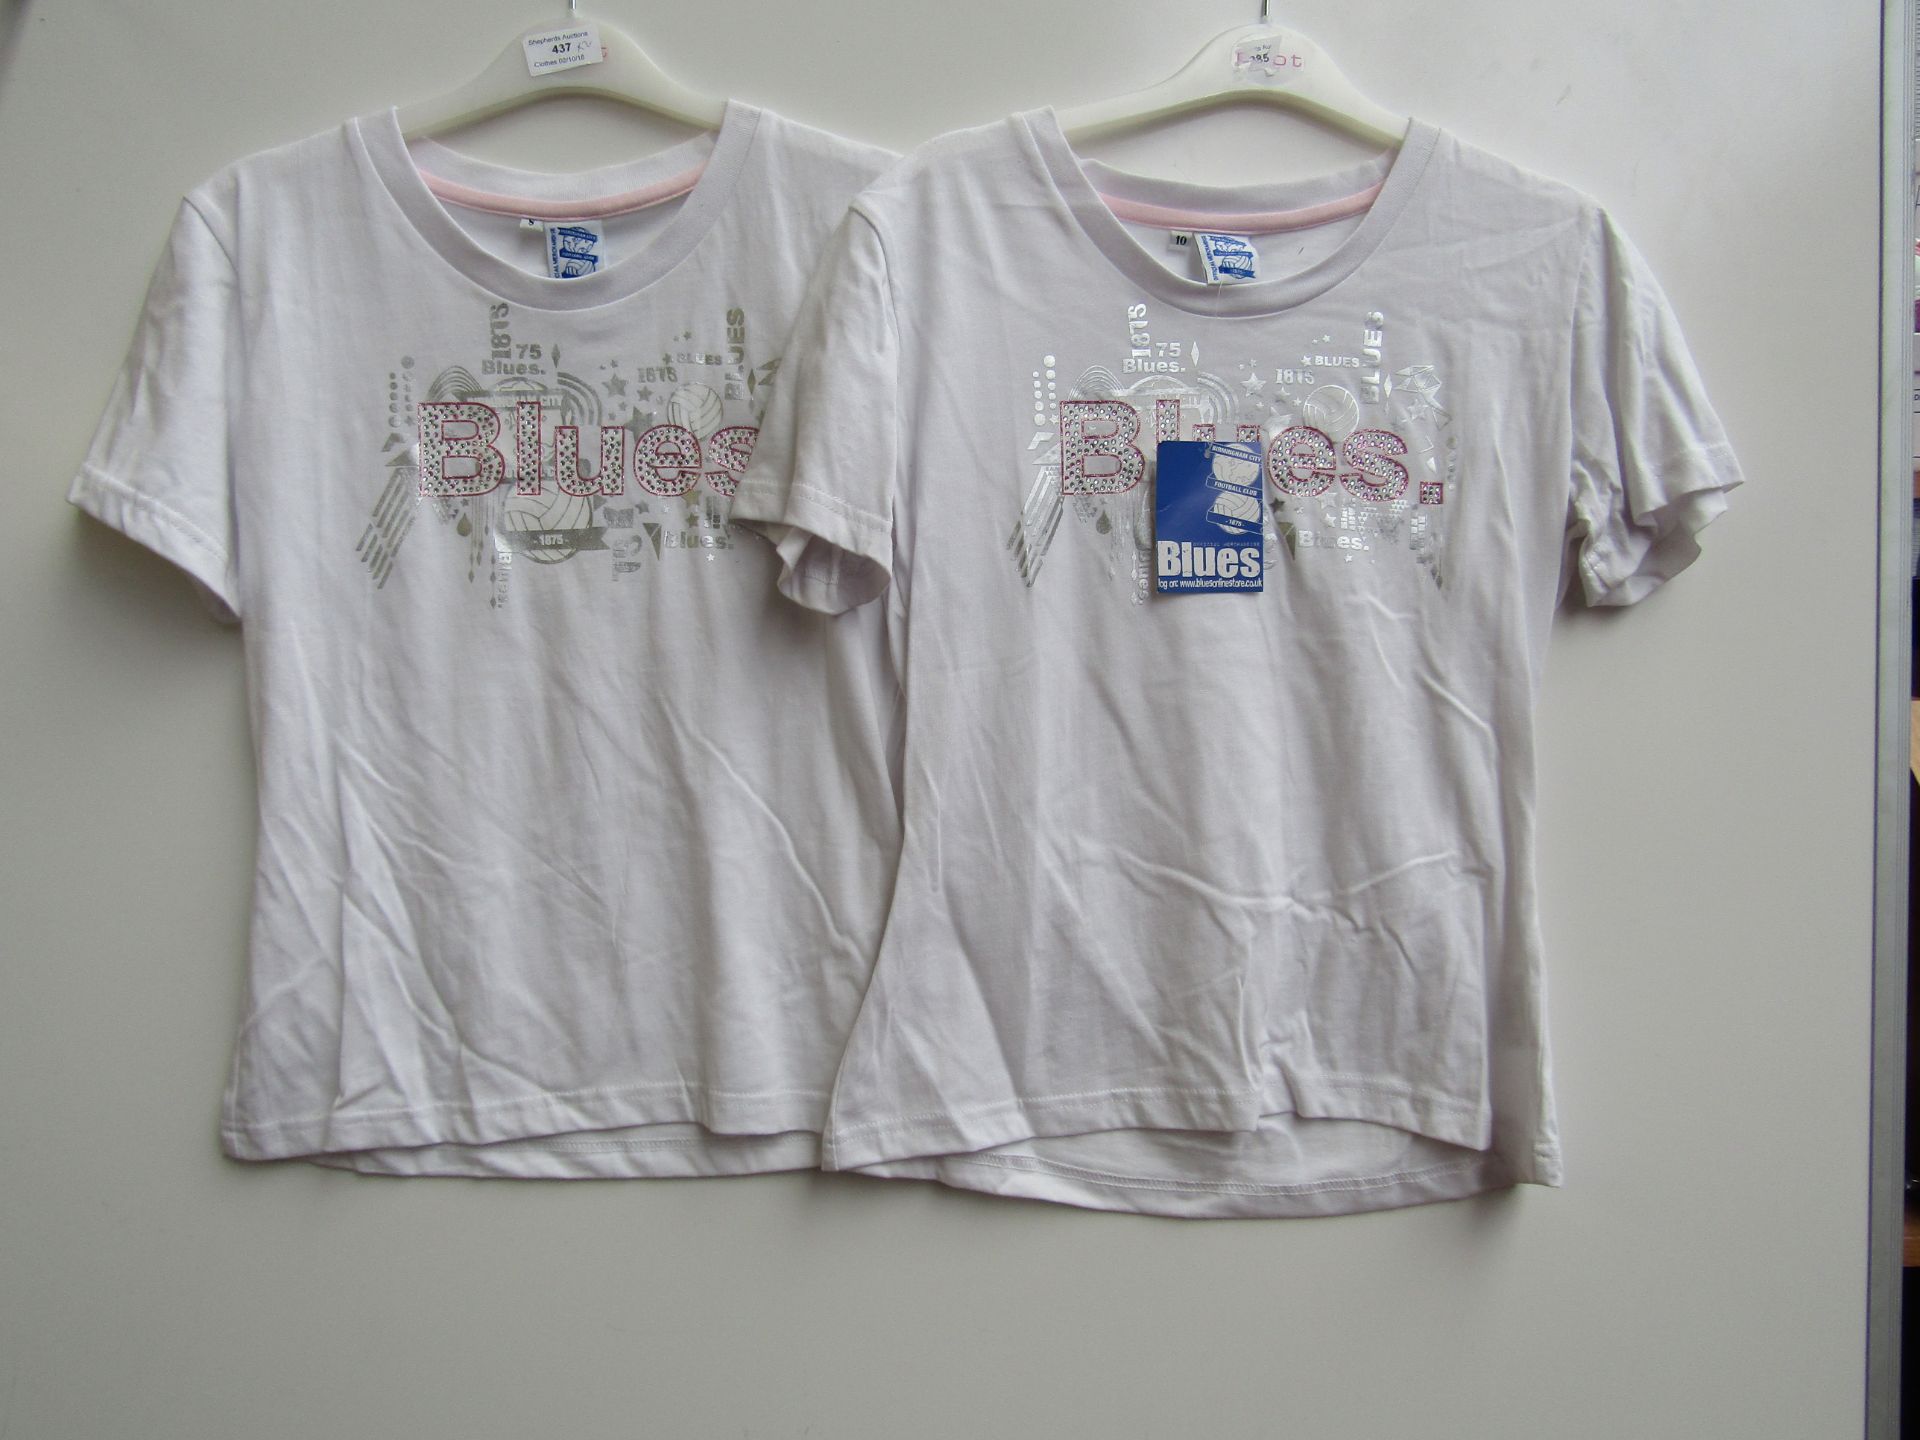 2x ladies Birmingham City T-Shirts, one size 8 and the other is size 10